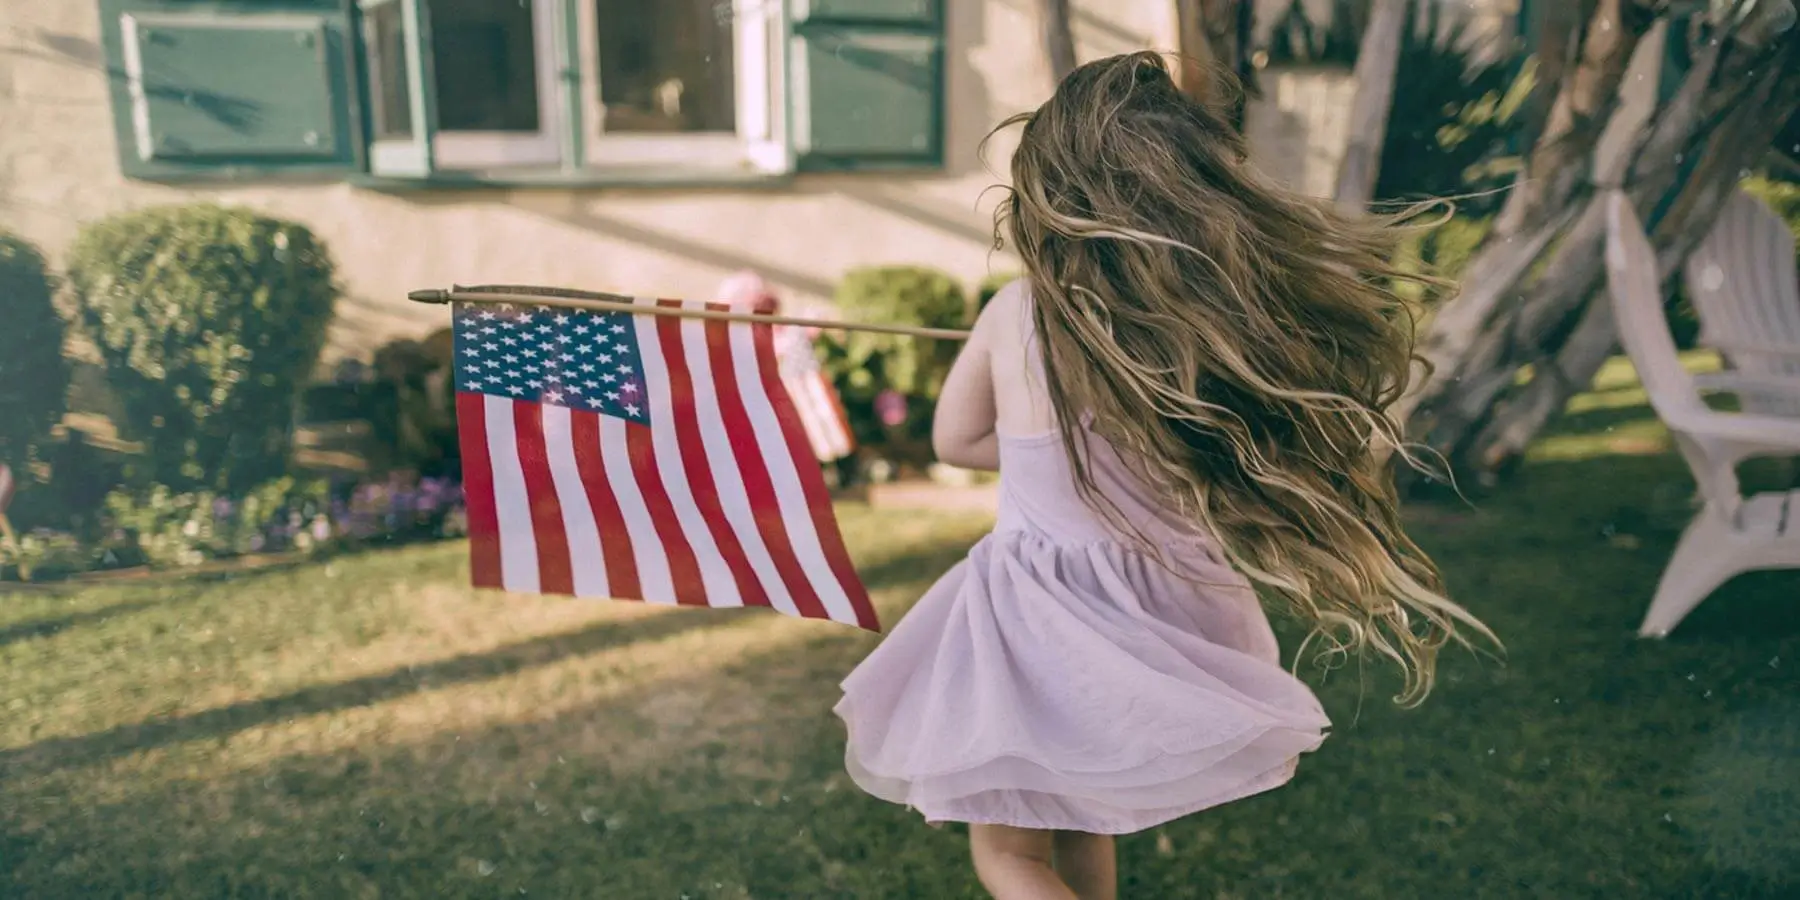 Little girl running around with an American Flag at a house.